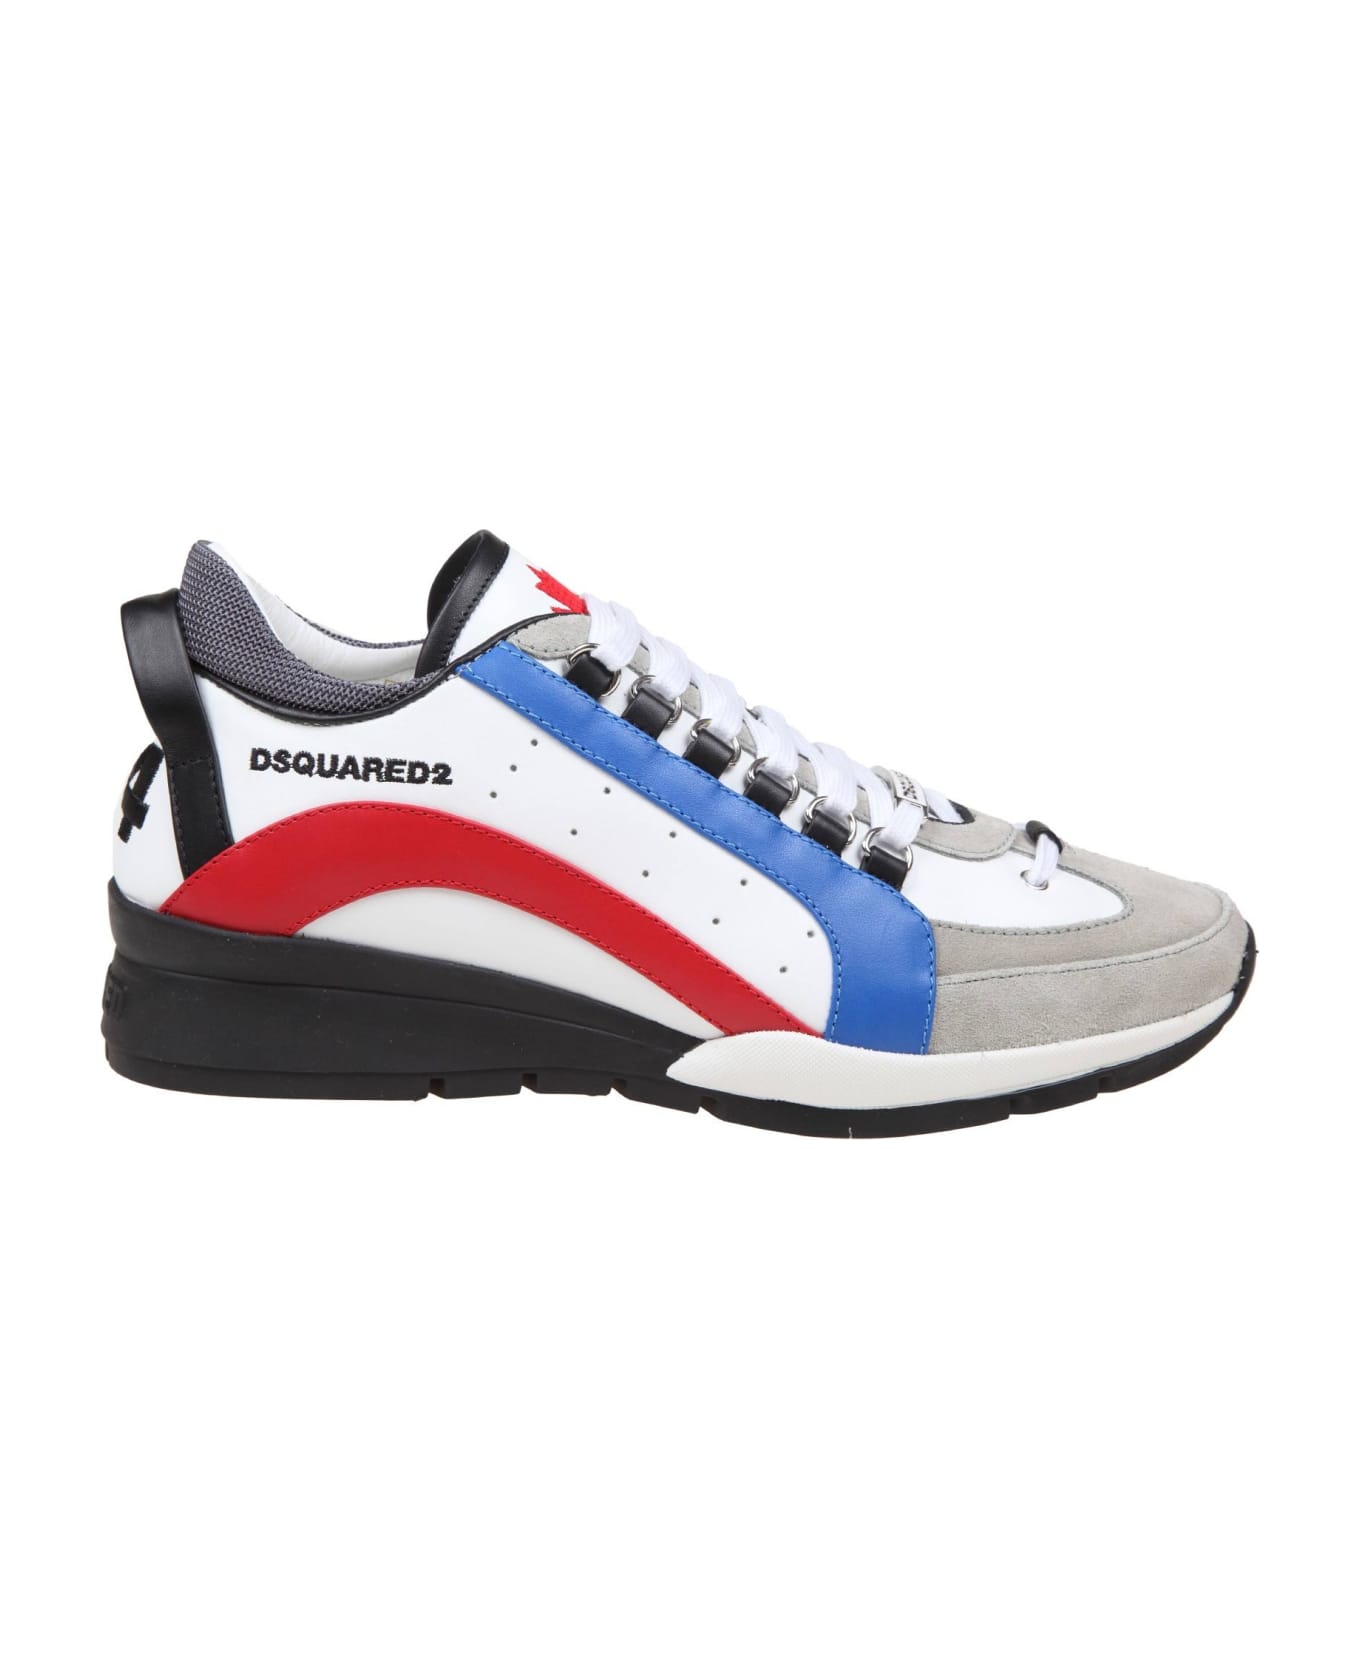 Dsquared2 Legend Sneakers In Suede And Leather - WHITE